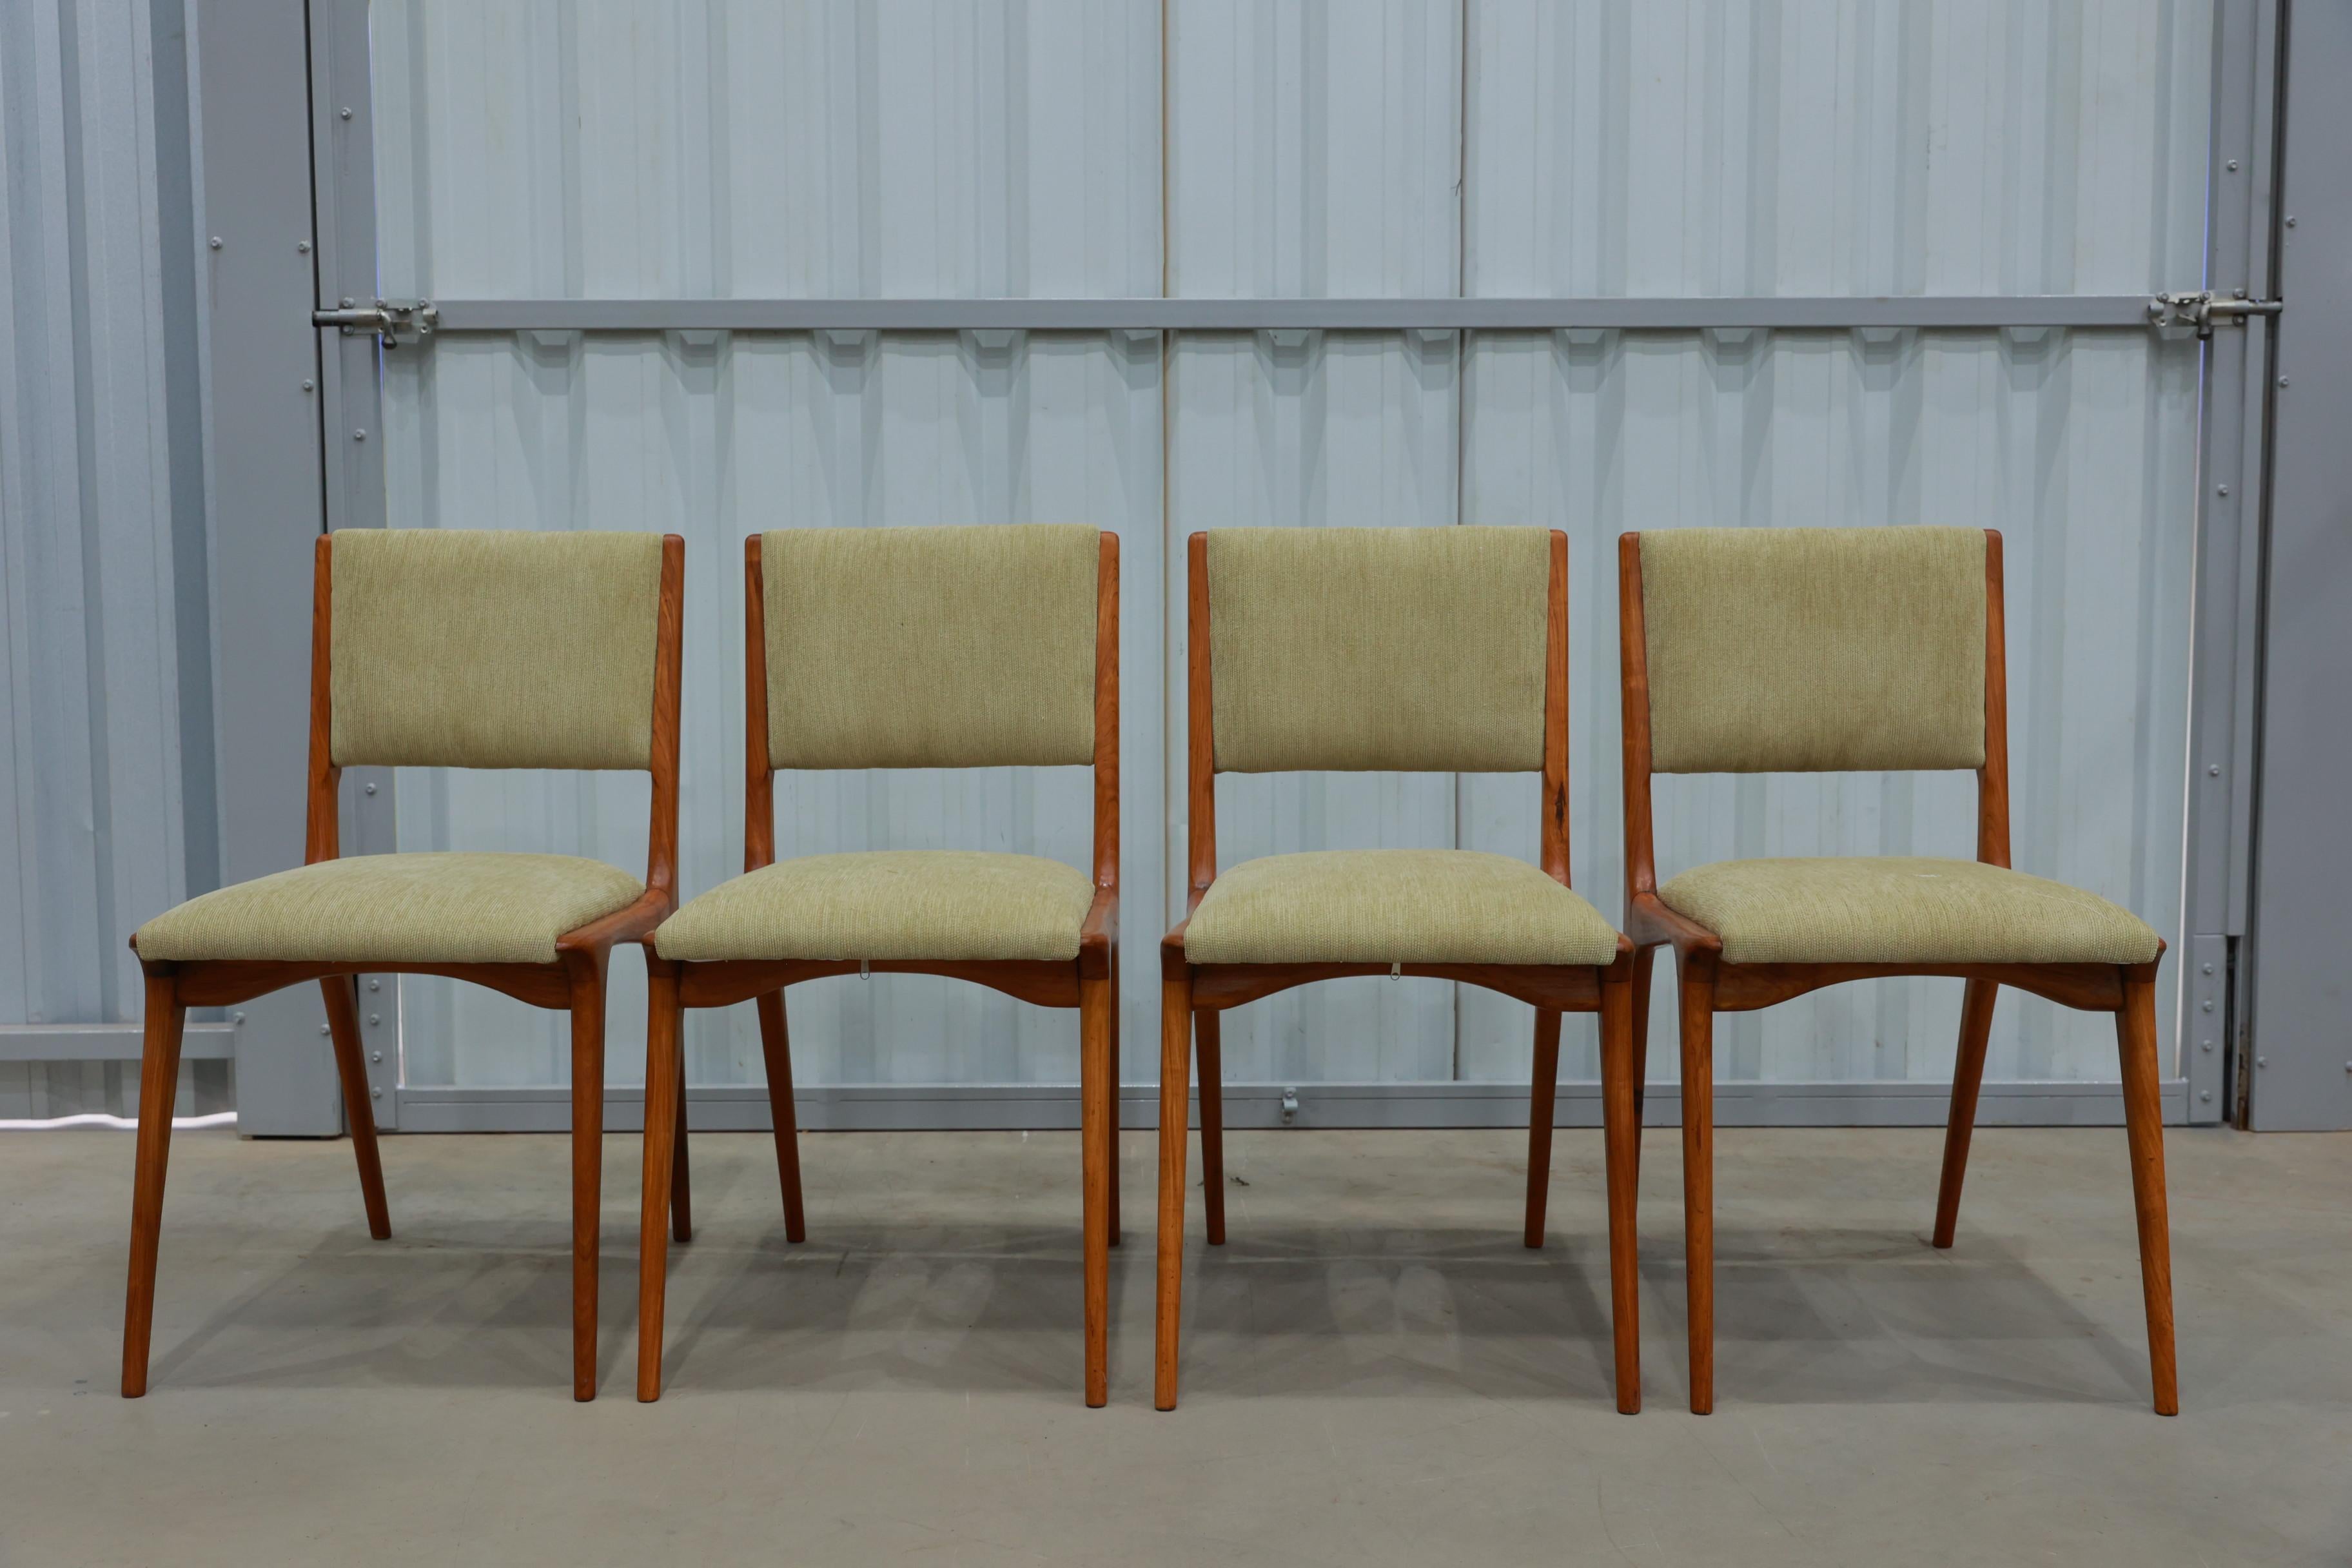 Available today,  with free US domestic shipping included, these Brazilian Modern Set of Four Chairs in Caviuna Wood by Carlo Hauner and Martin Eisler are spectacular!

The wood pieces produced by Carlo Hauner for Forma Móveis e Objetos de Arte